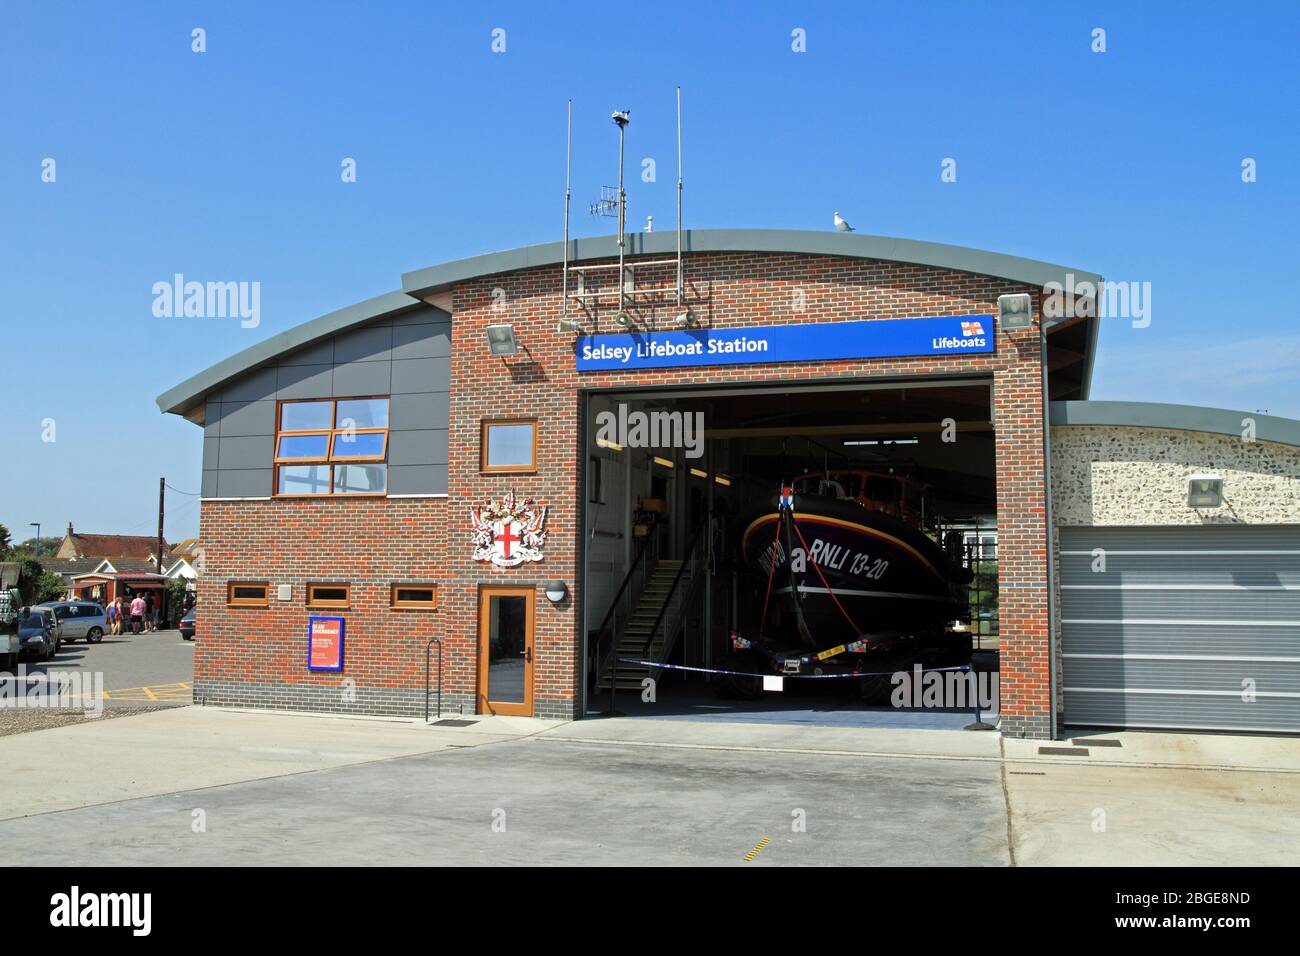 Selsey Lifeboat Station, Selsey, West Sussex, England. Stock Photo